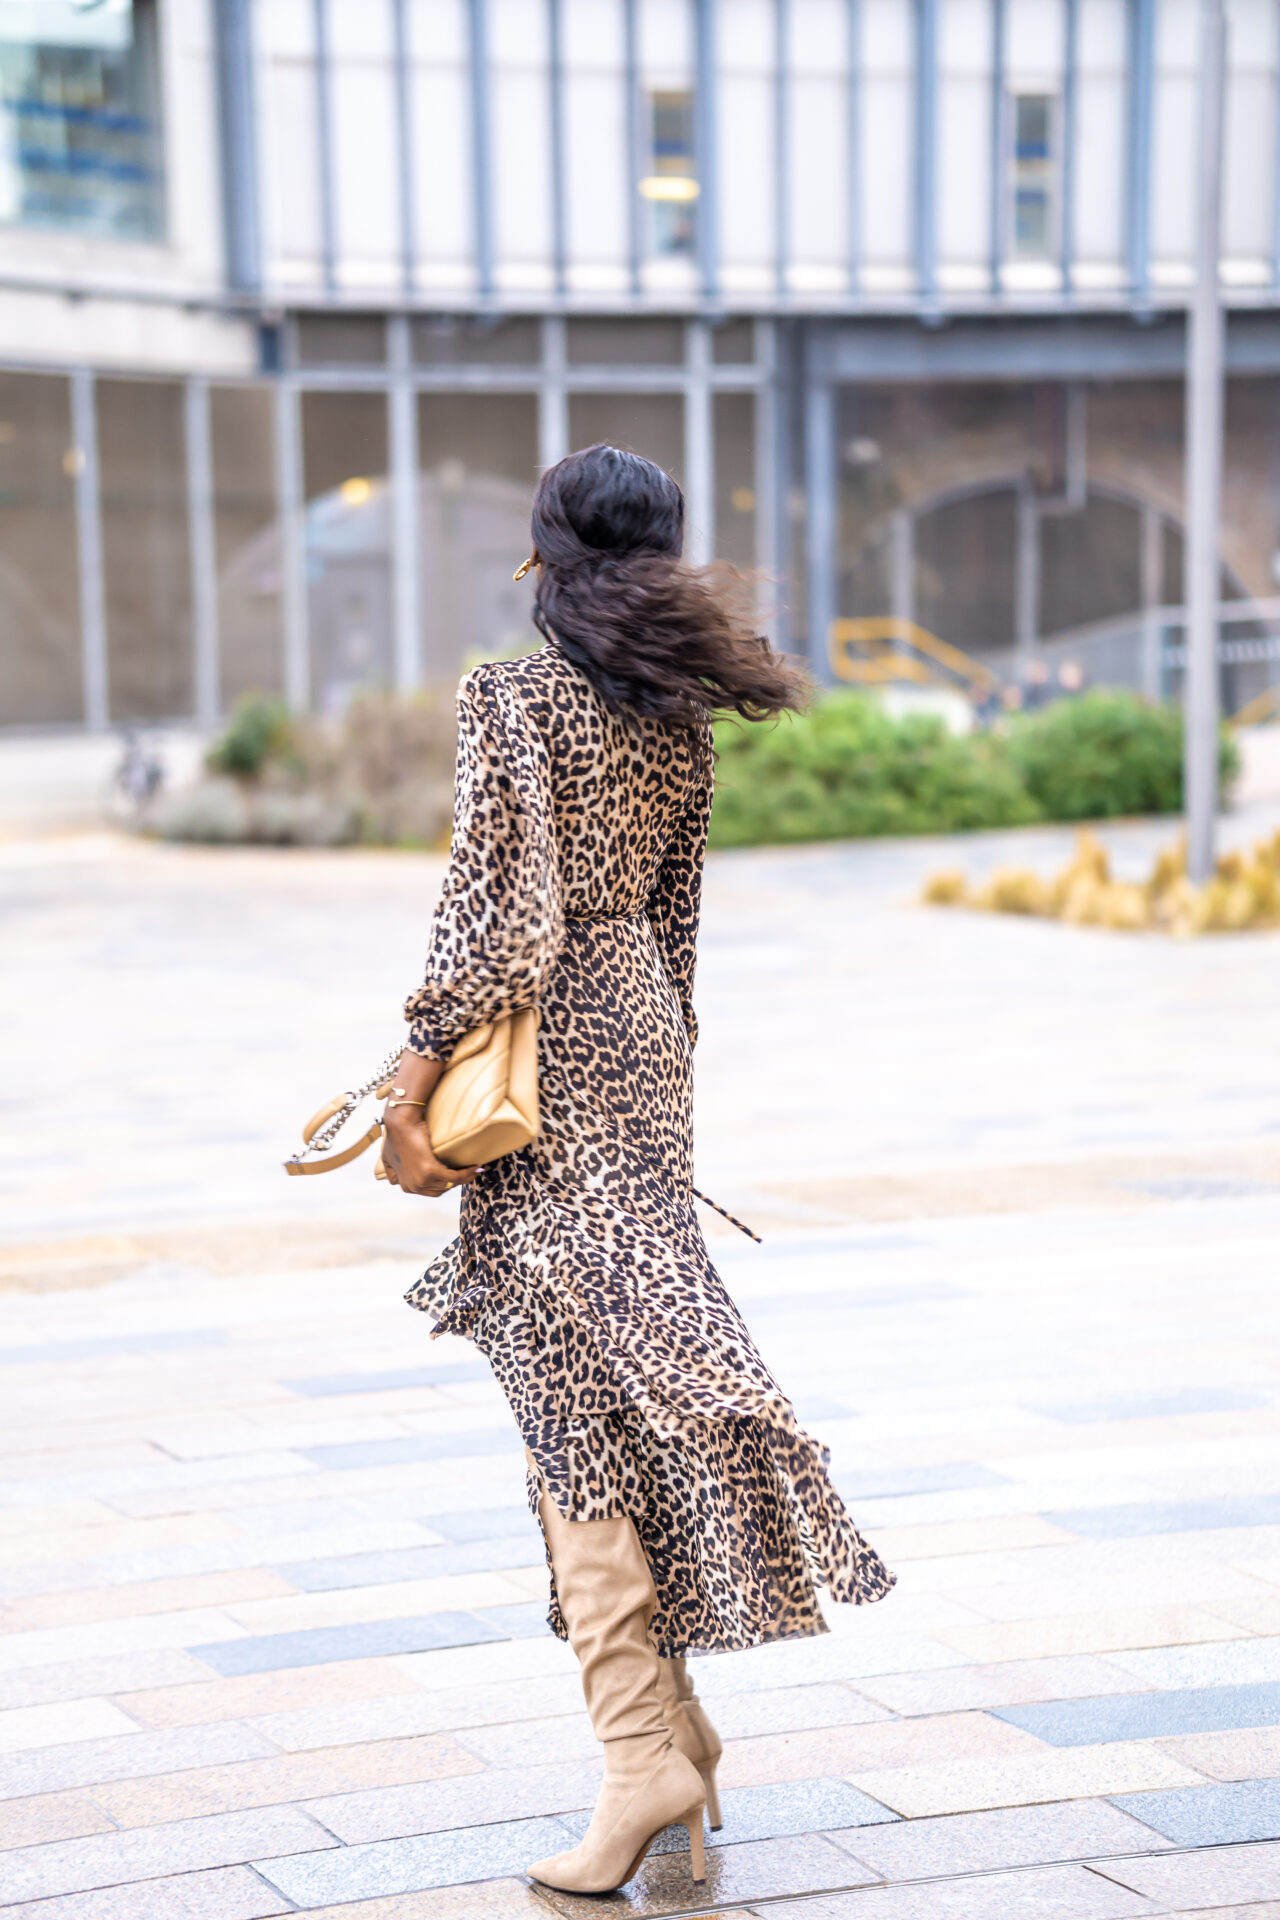 Leopard print dress for all Spring Occasions: Get to know me